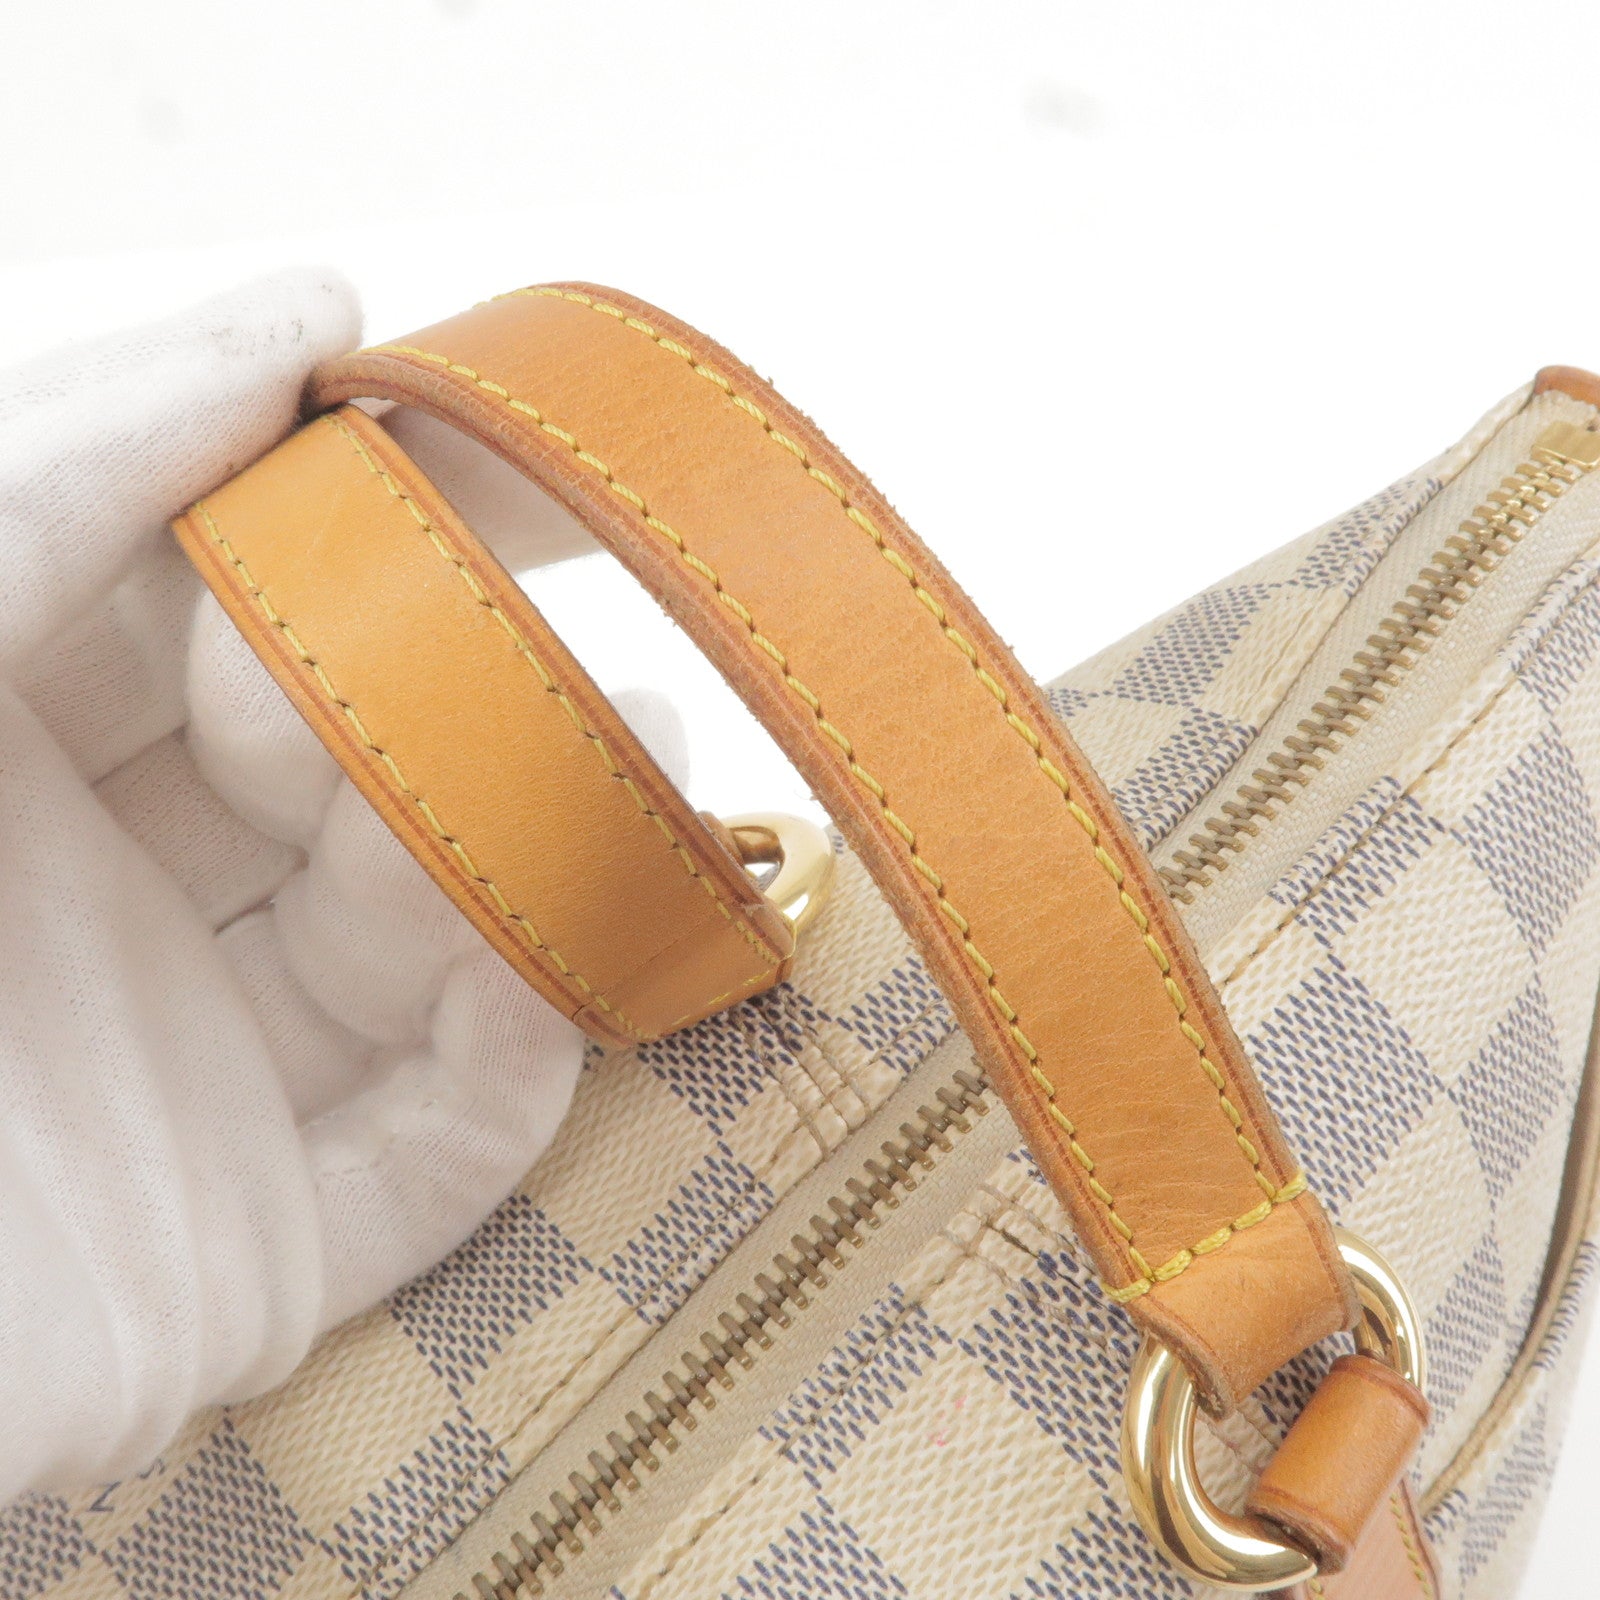 Louis Vuitton key holder/ Multicles 6 Damier Azur Reveal and Initial Review  